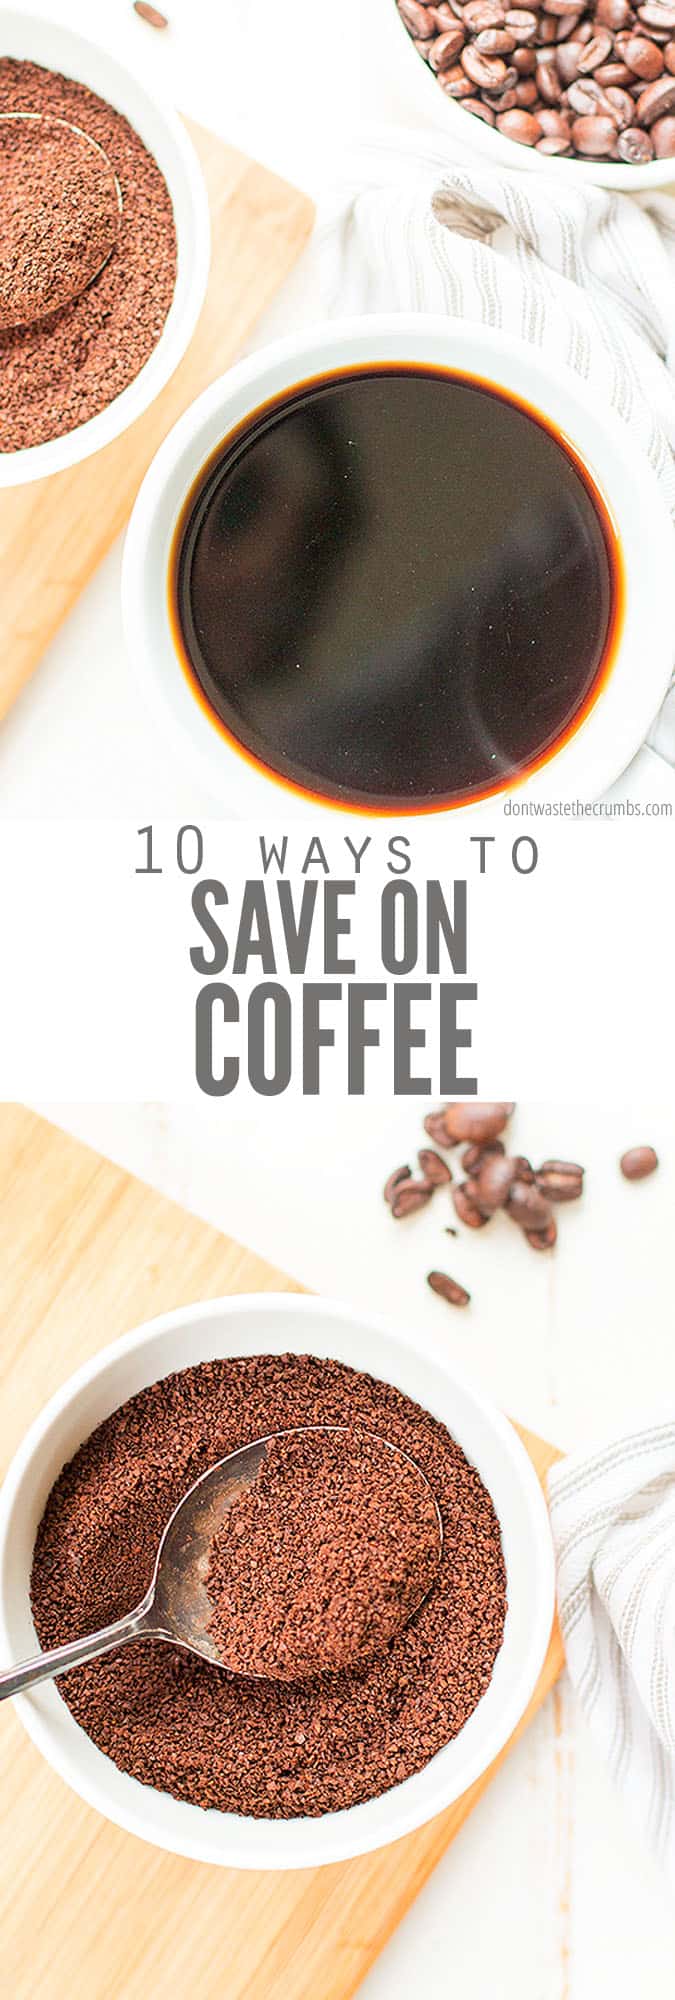 Explore these 10 Ways to Save Money on Coffee at home with these great tips to help you enjoy a great morning brew without busting the budget! Enjoy a cup of coffee with our rich and delicious Homemade Vanilla Bean Coffee Creamer. 